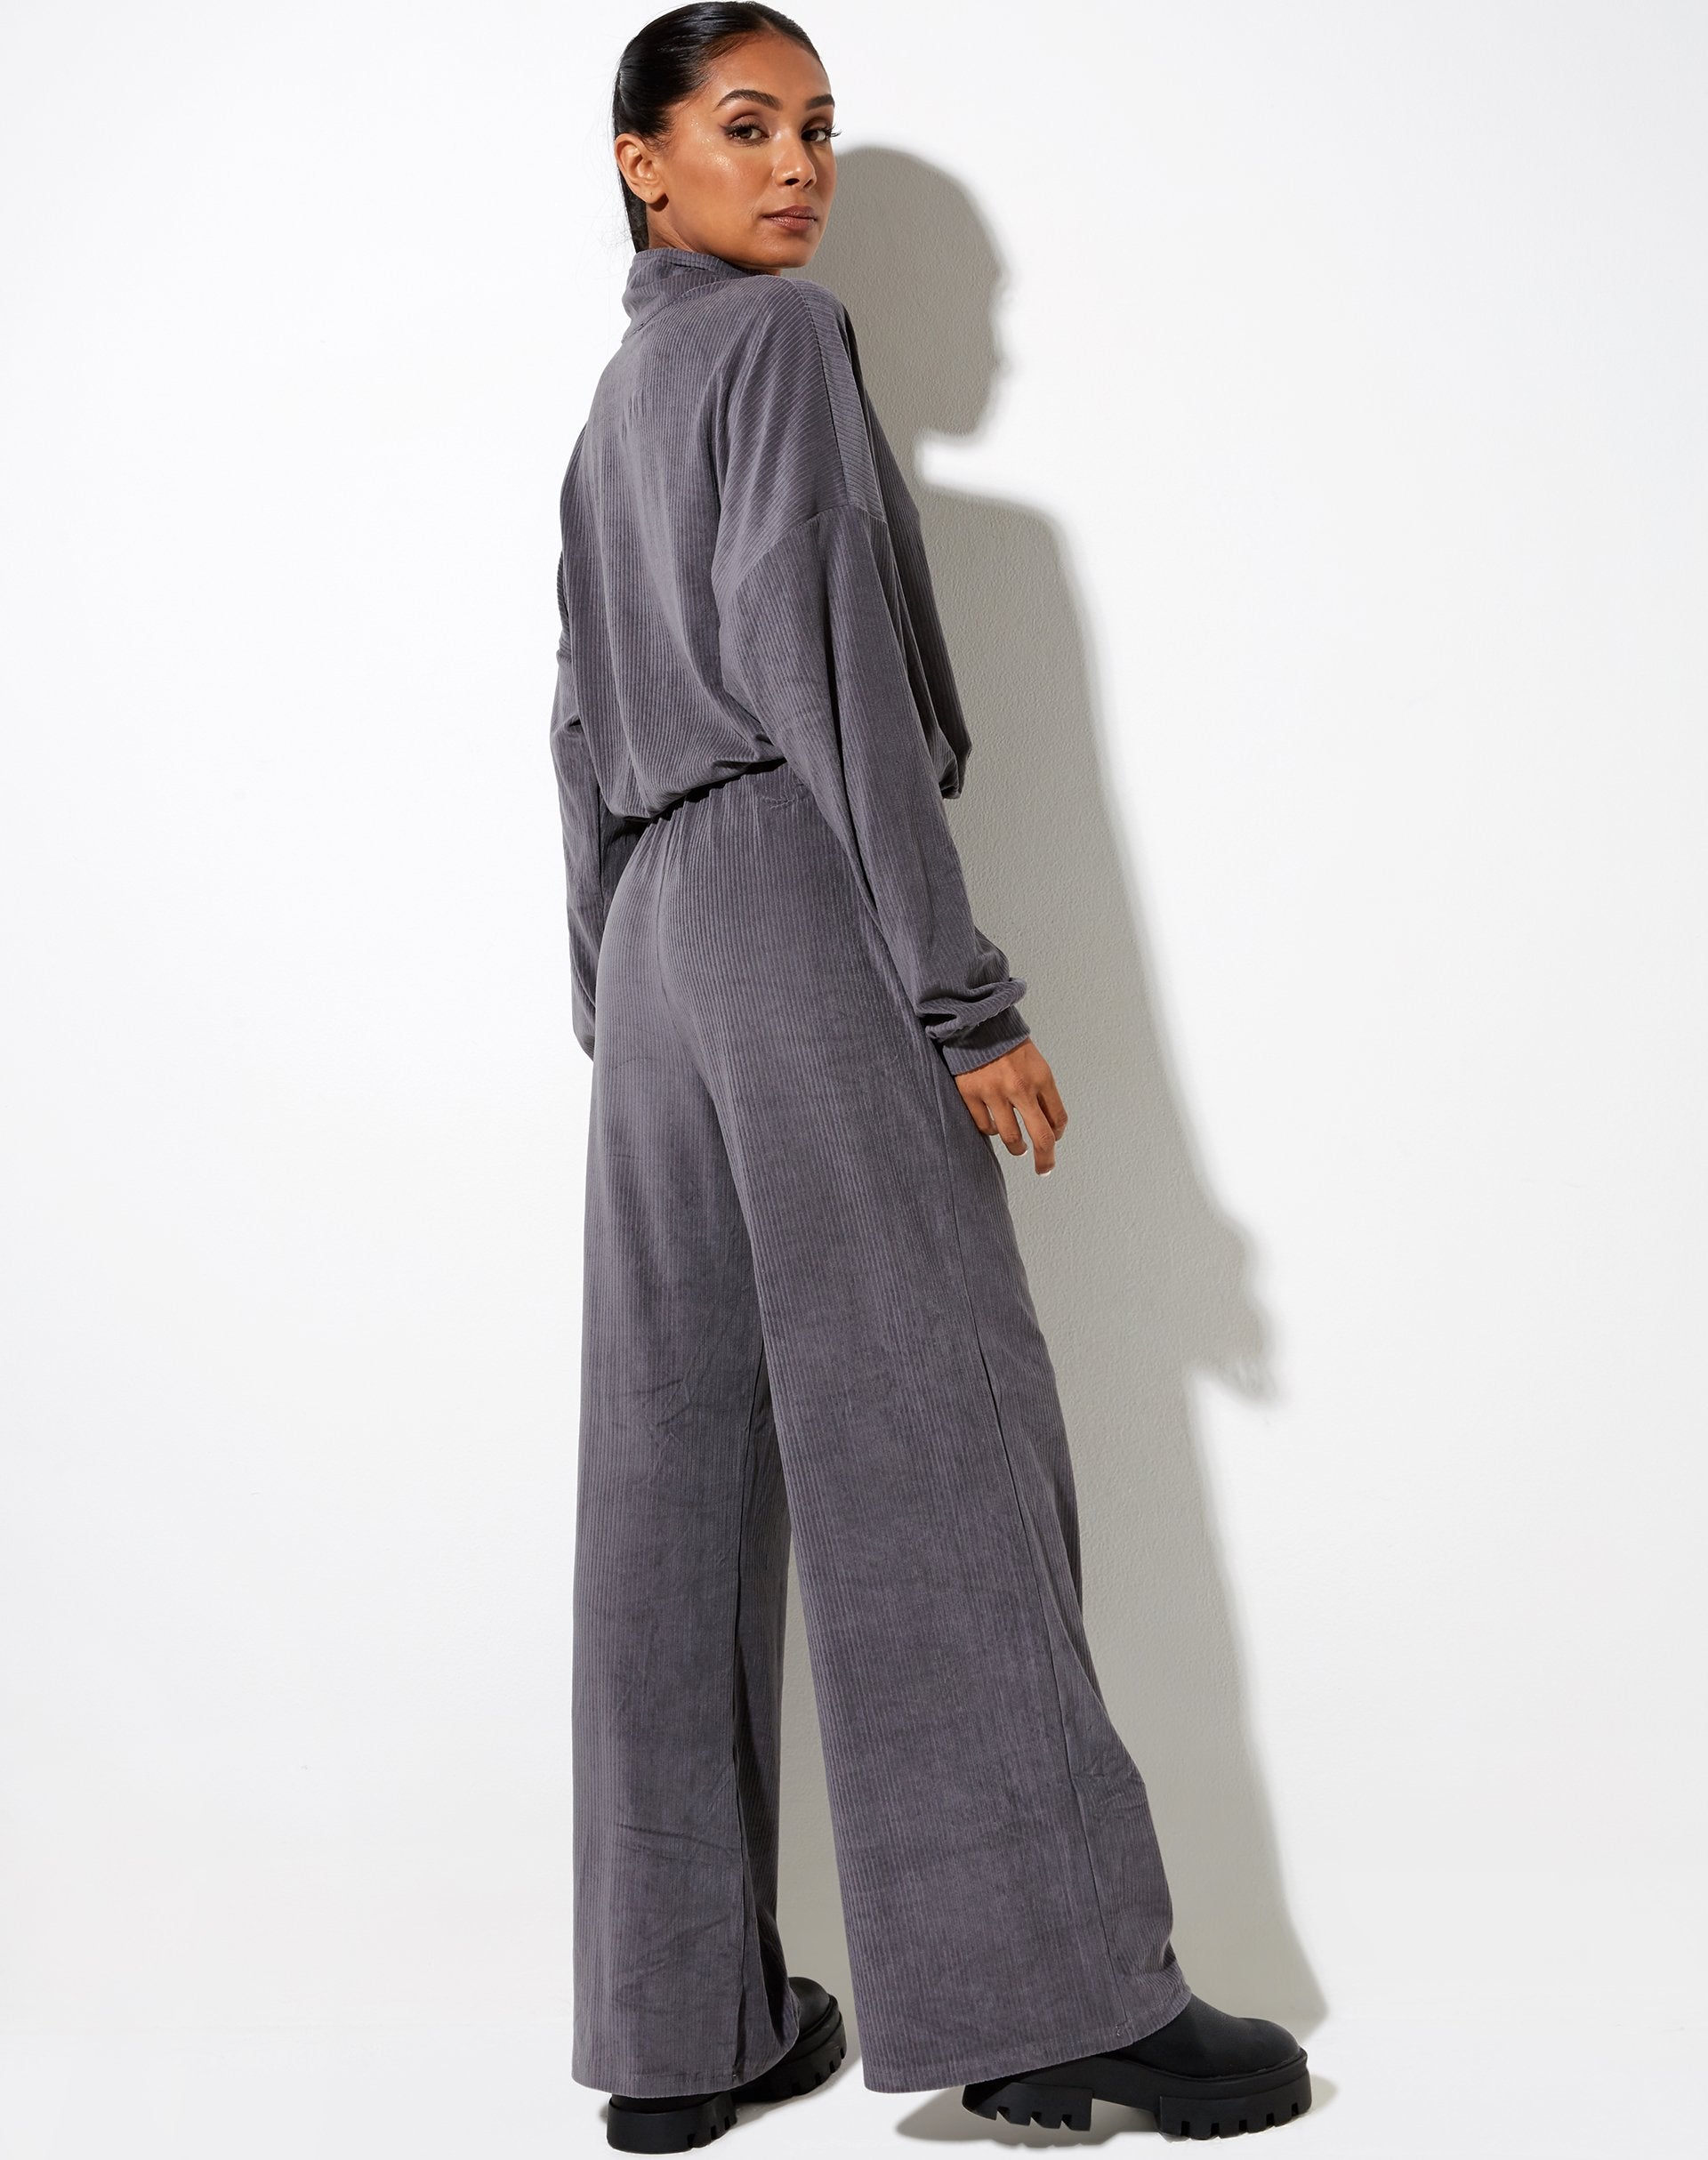 Image of Olini Jumper in Charcoal Grey Angel Embro